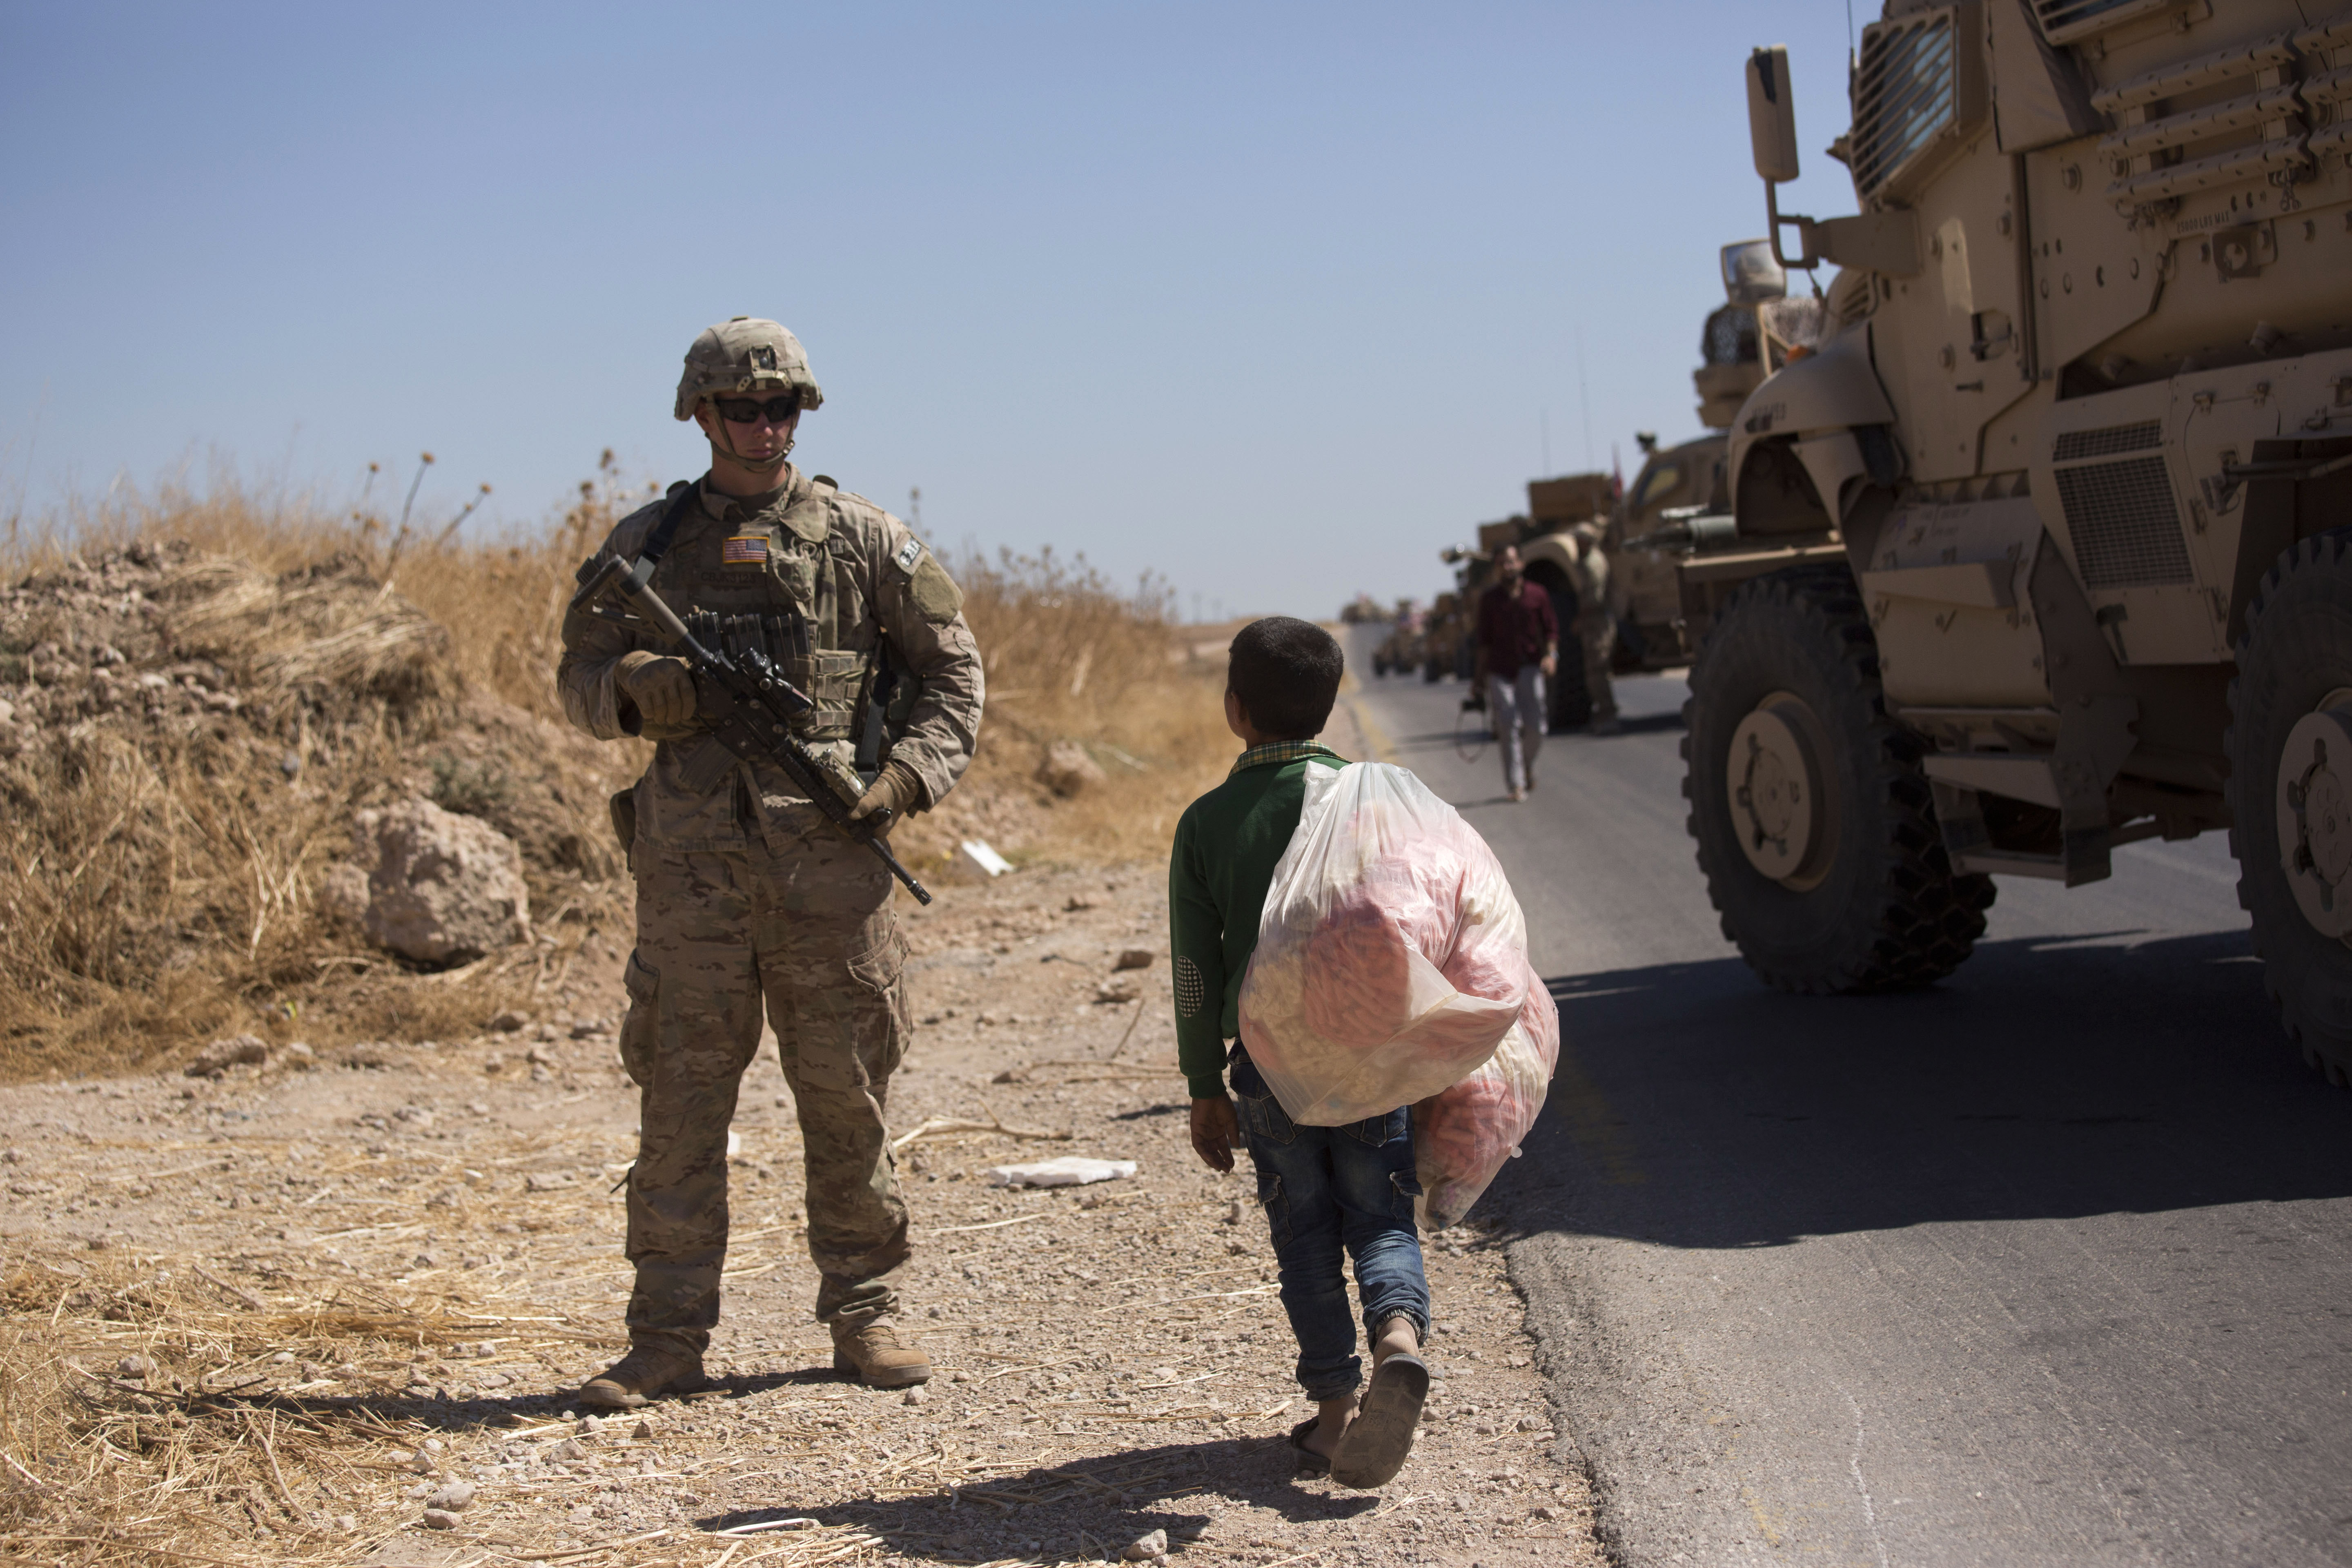 A Syrian boy selling snacks looks at a U.S. soldier standing guard during the first joint ground patrol by American and Turkish forces in the so-called 